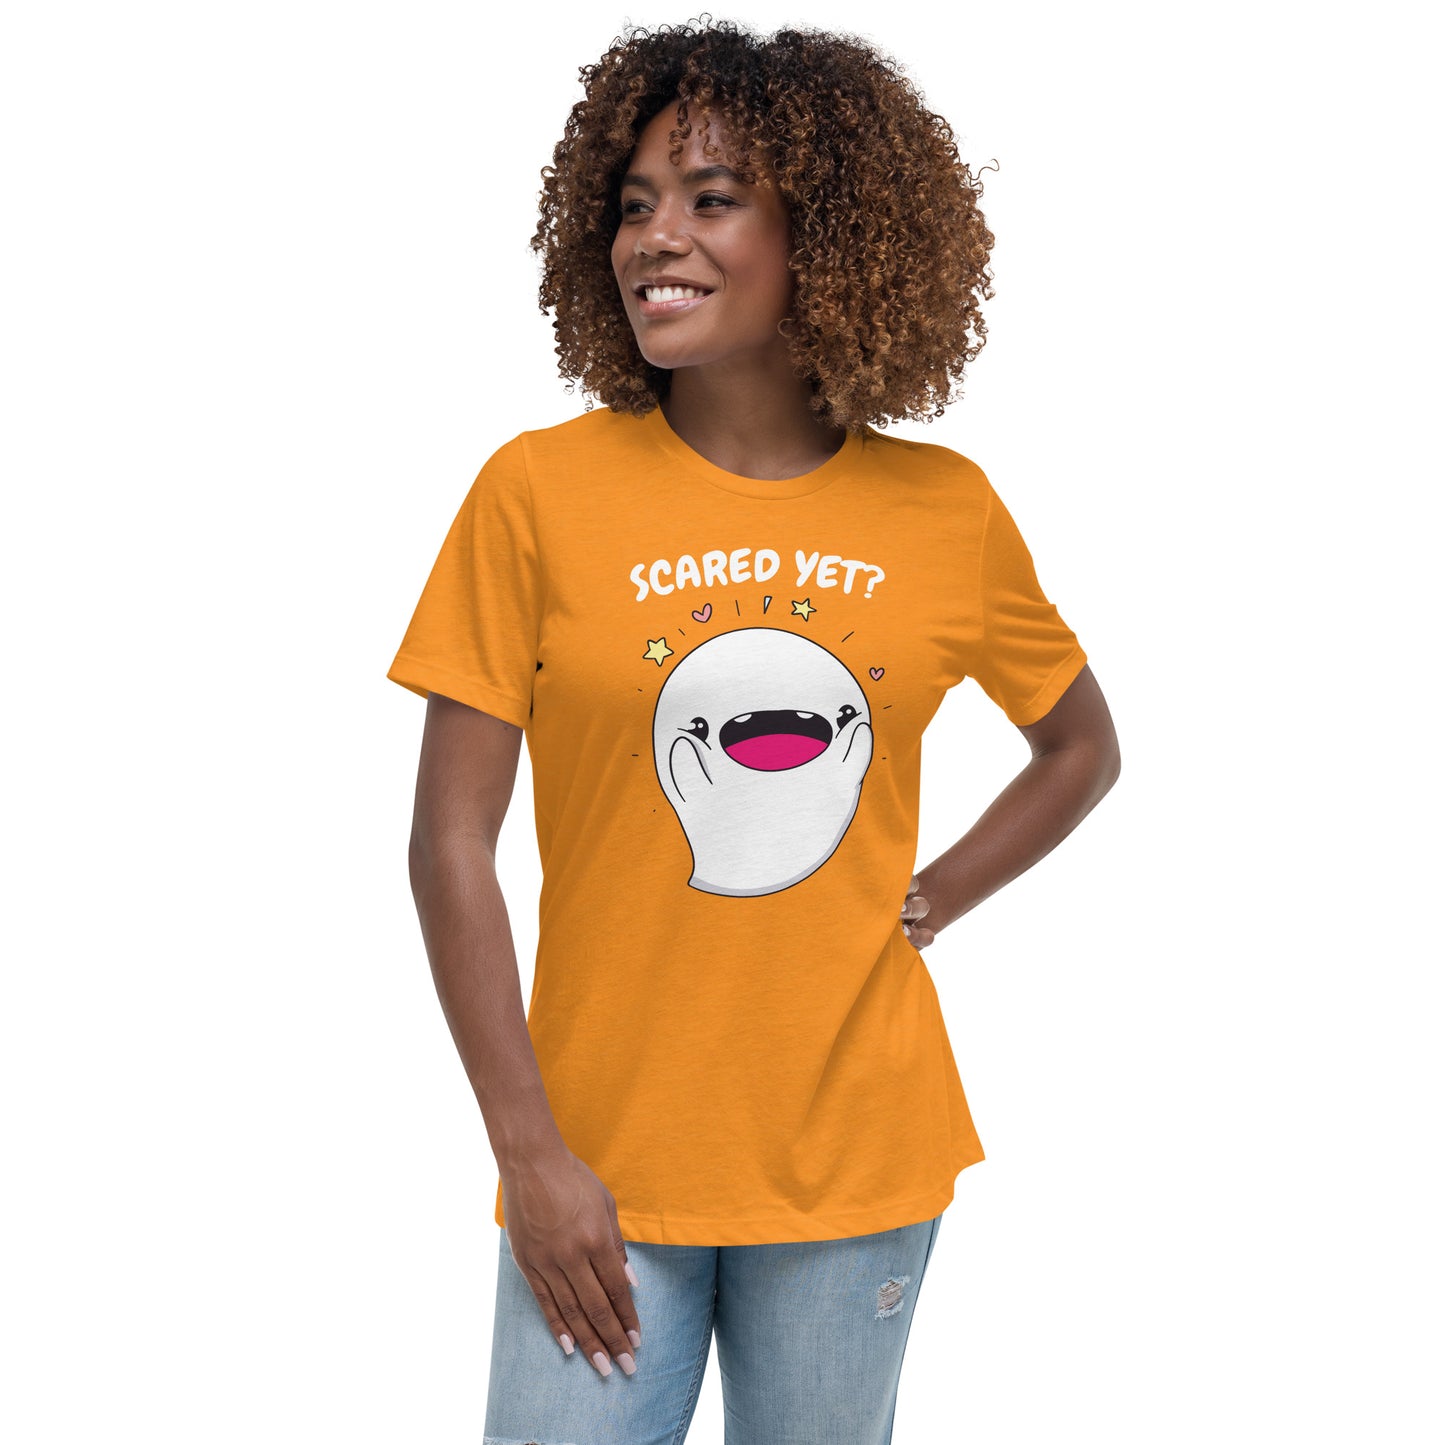 Scared yet - Women's Relaxed T-Shirt